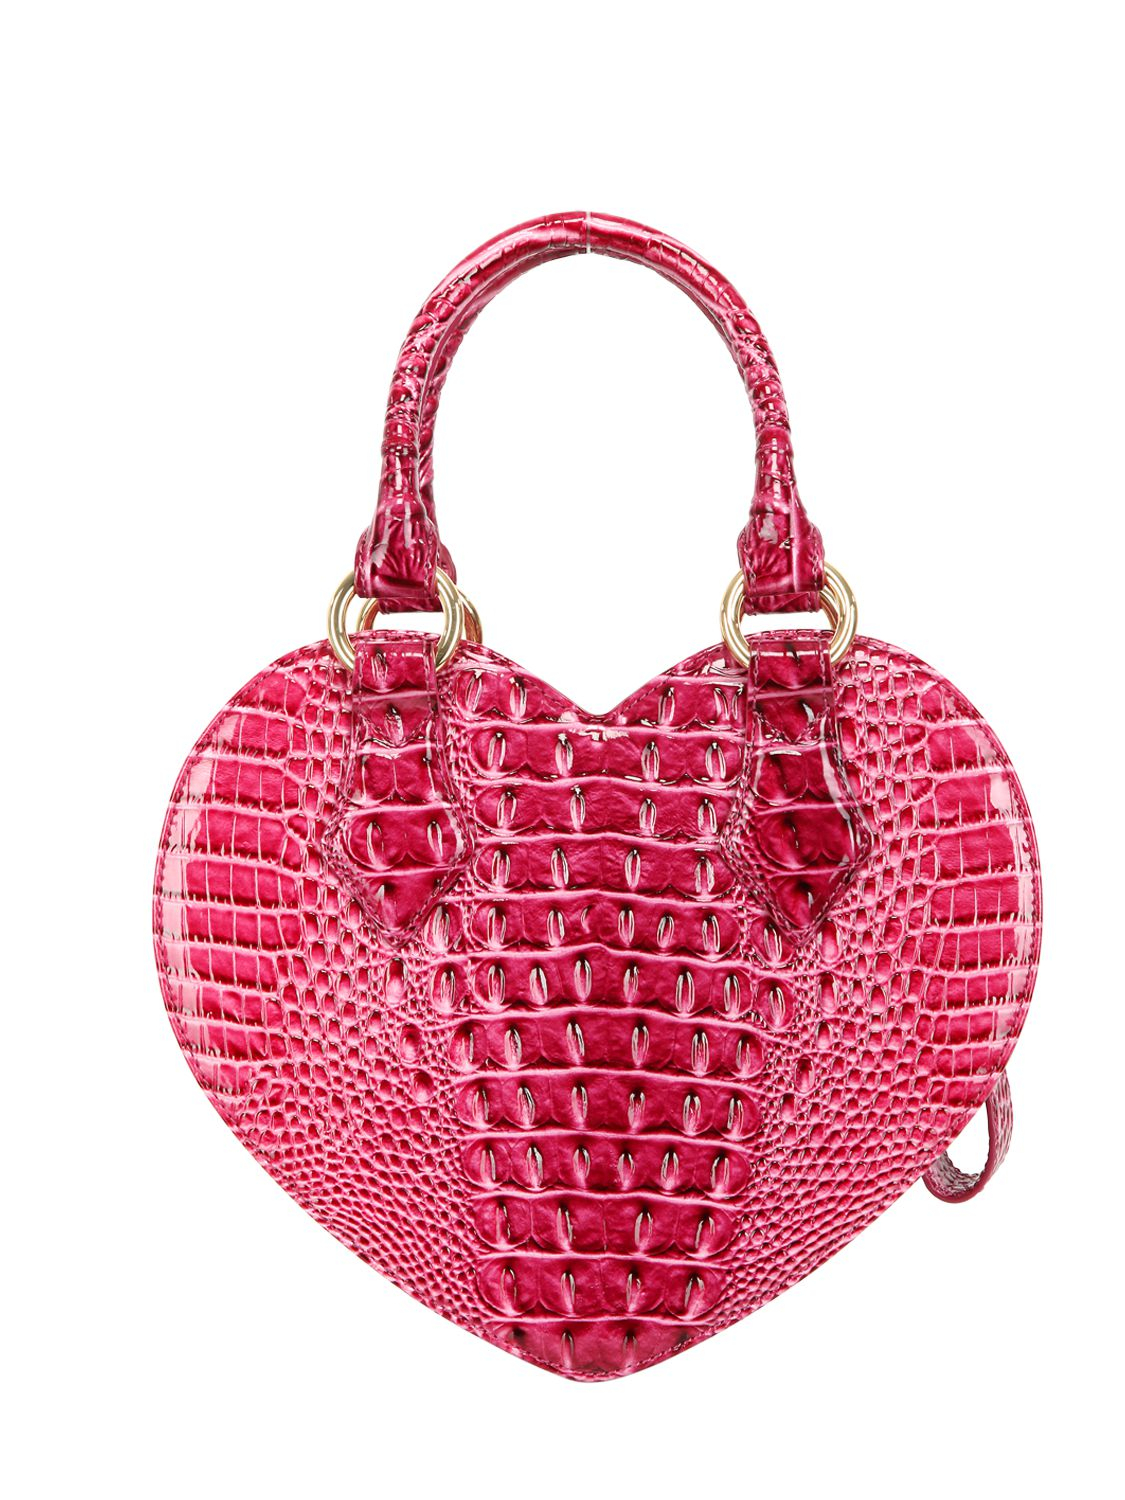 Vivienne Westwood Chancery Heart Printed Faux Leather Bag in Red (Pink ...